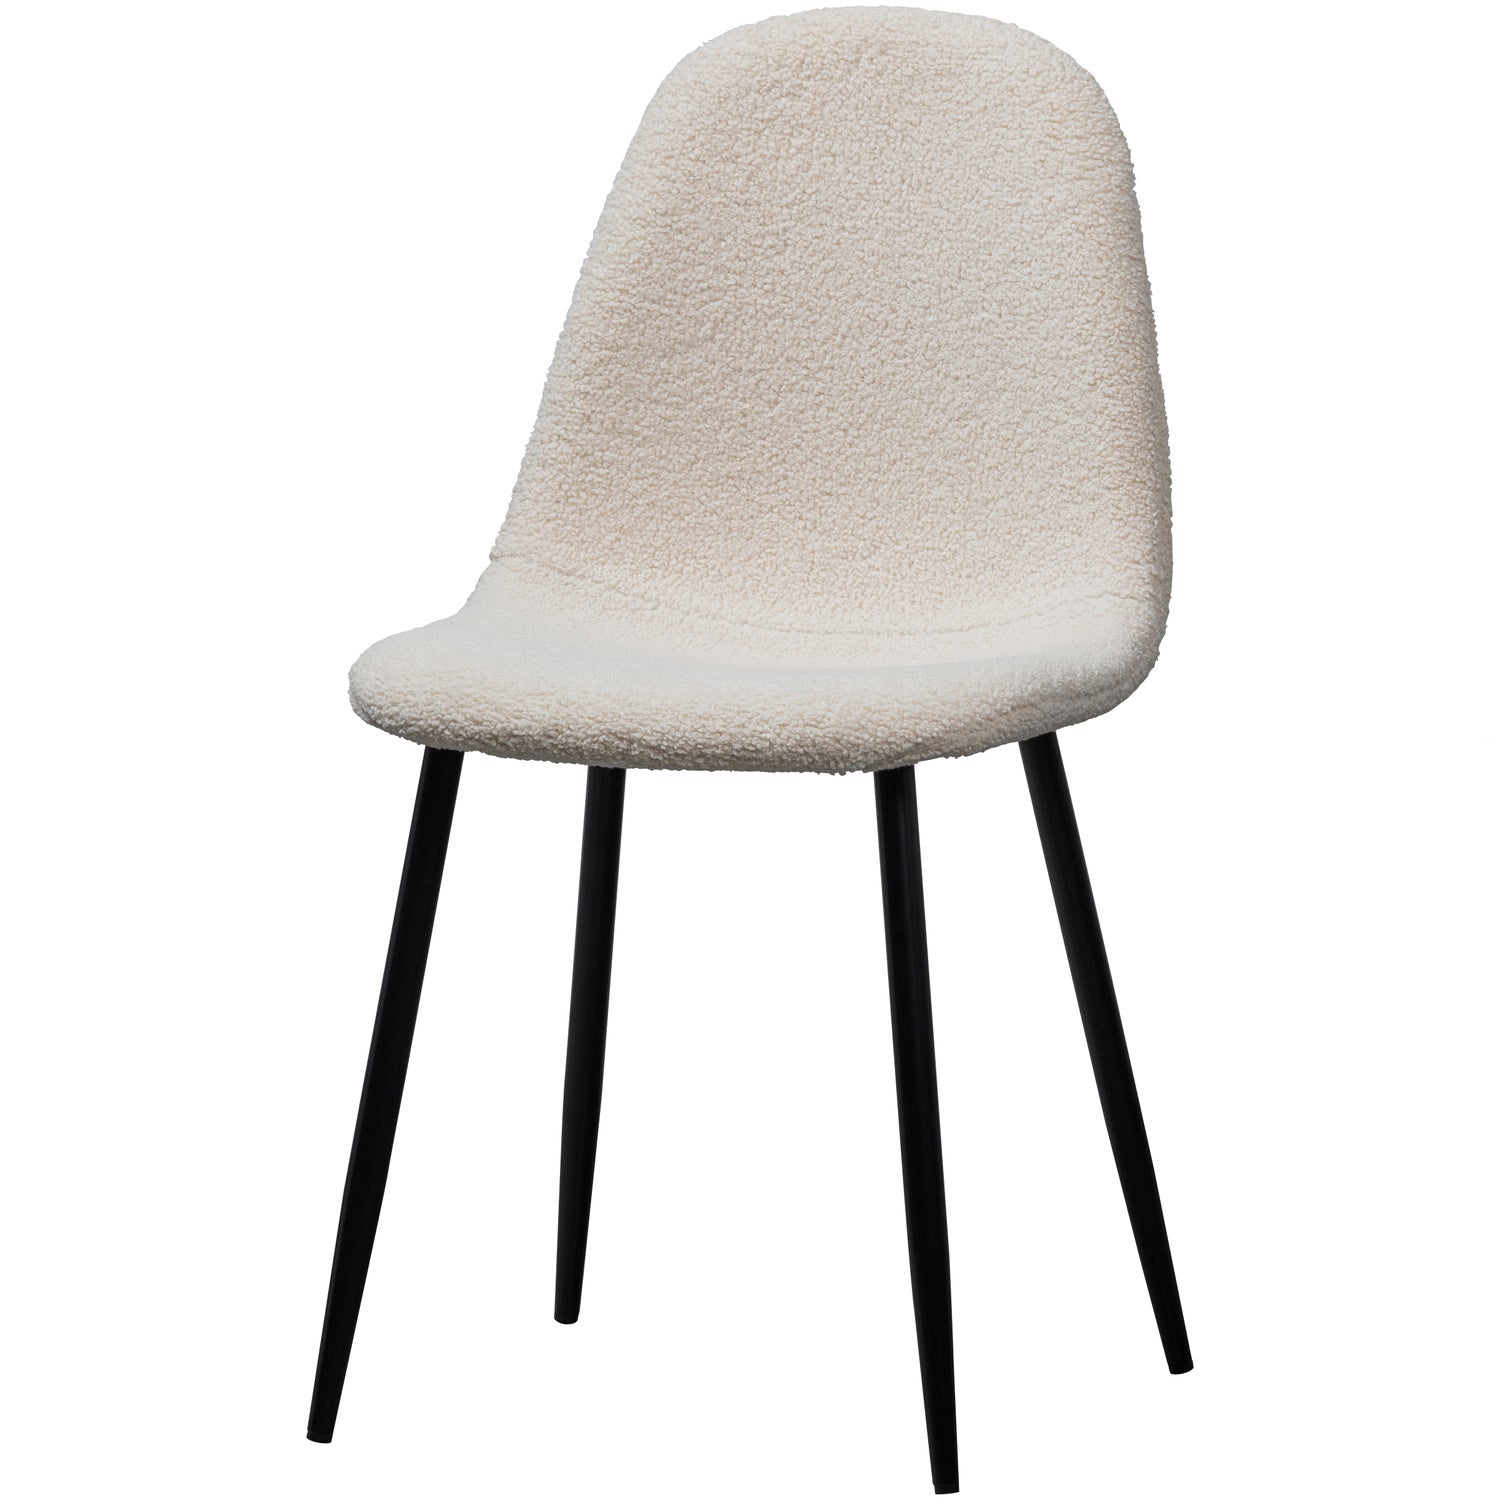 SET OF 2 - MARIJE DINING CHAIR TEDDY NATURAL